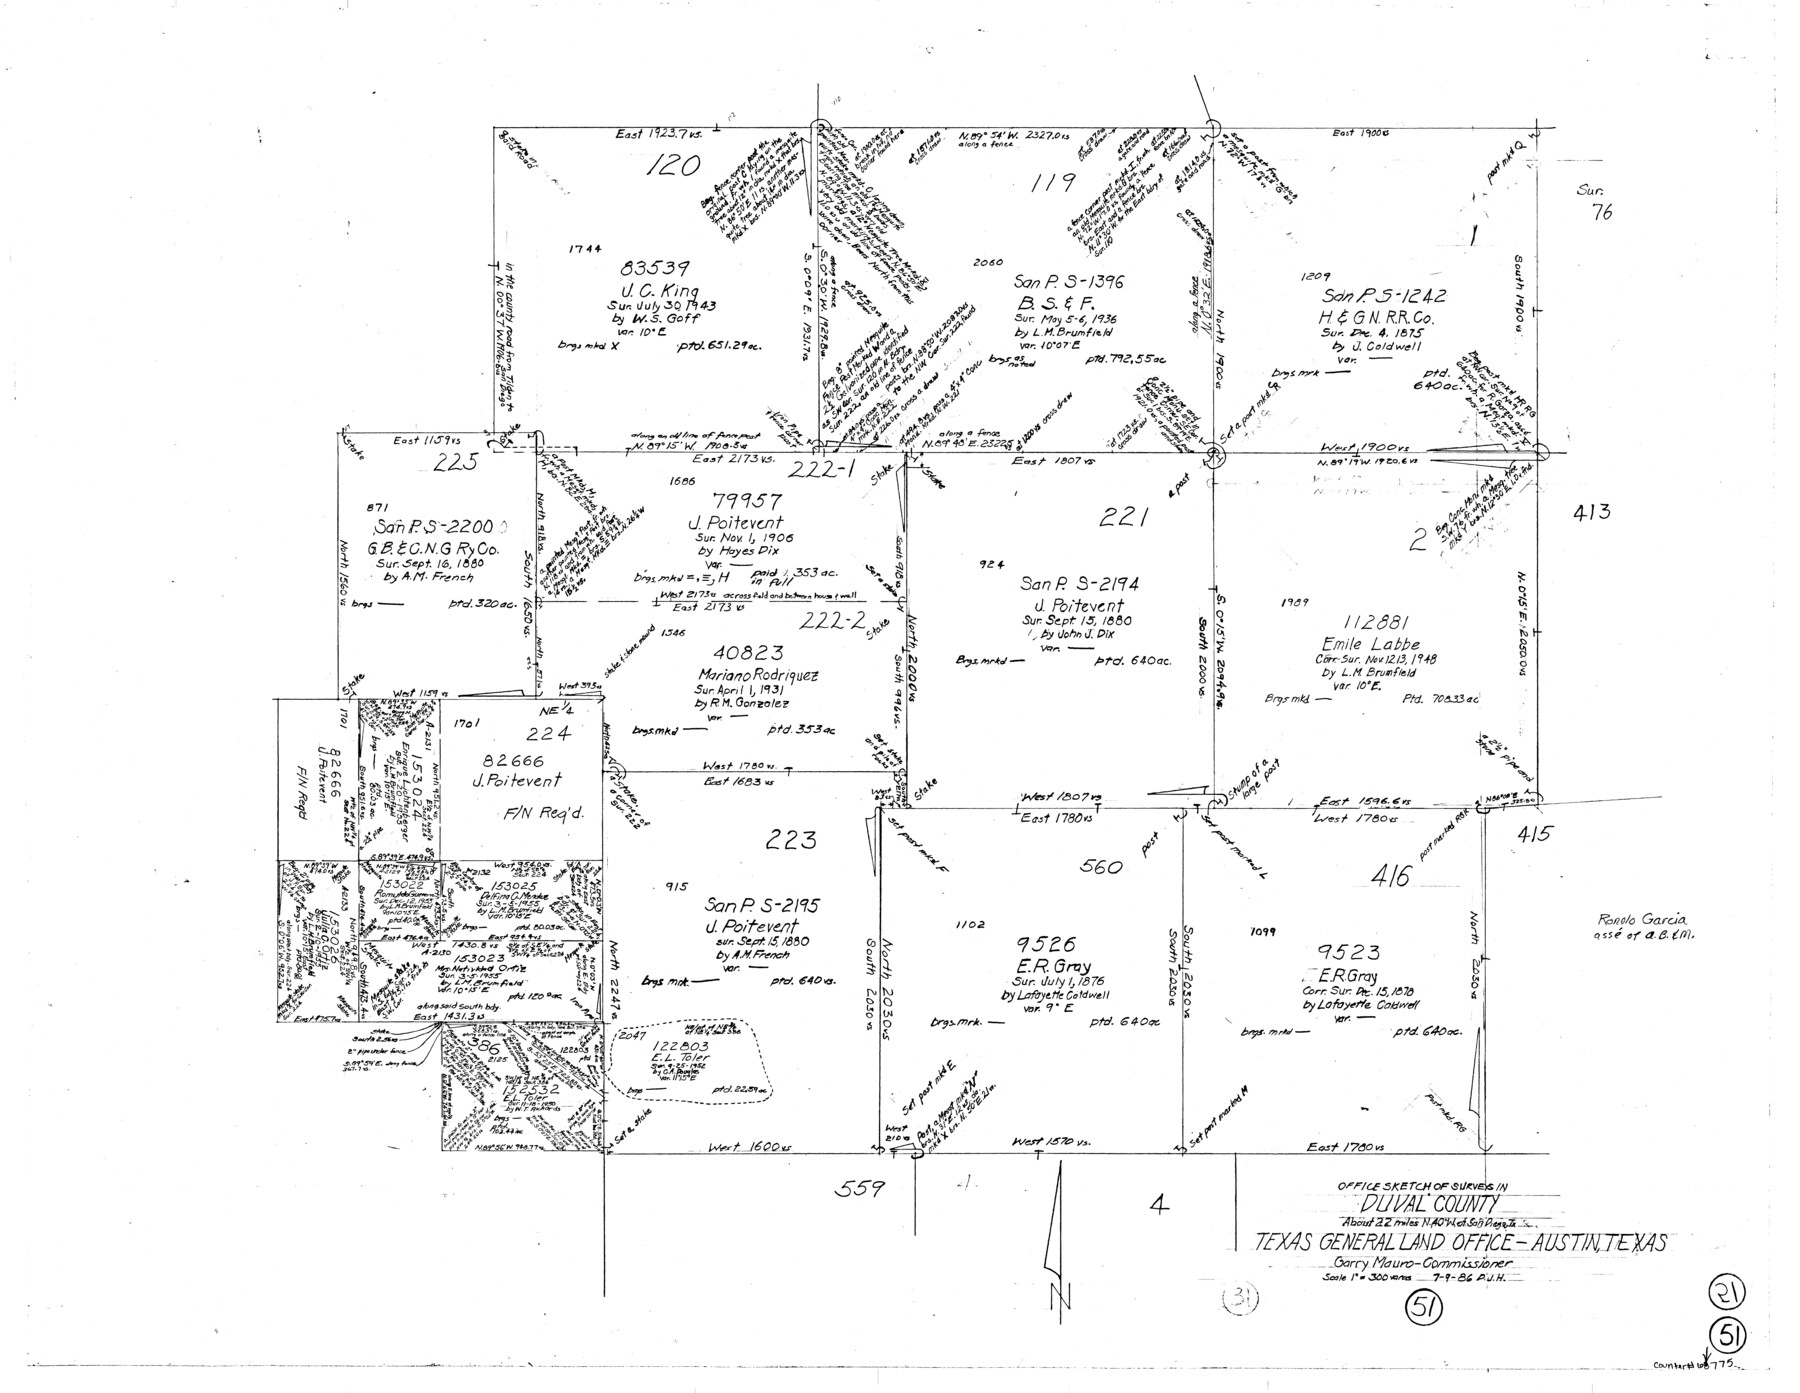 68775, Duval County Working Sketch 51, General Map Collection